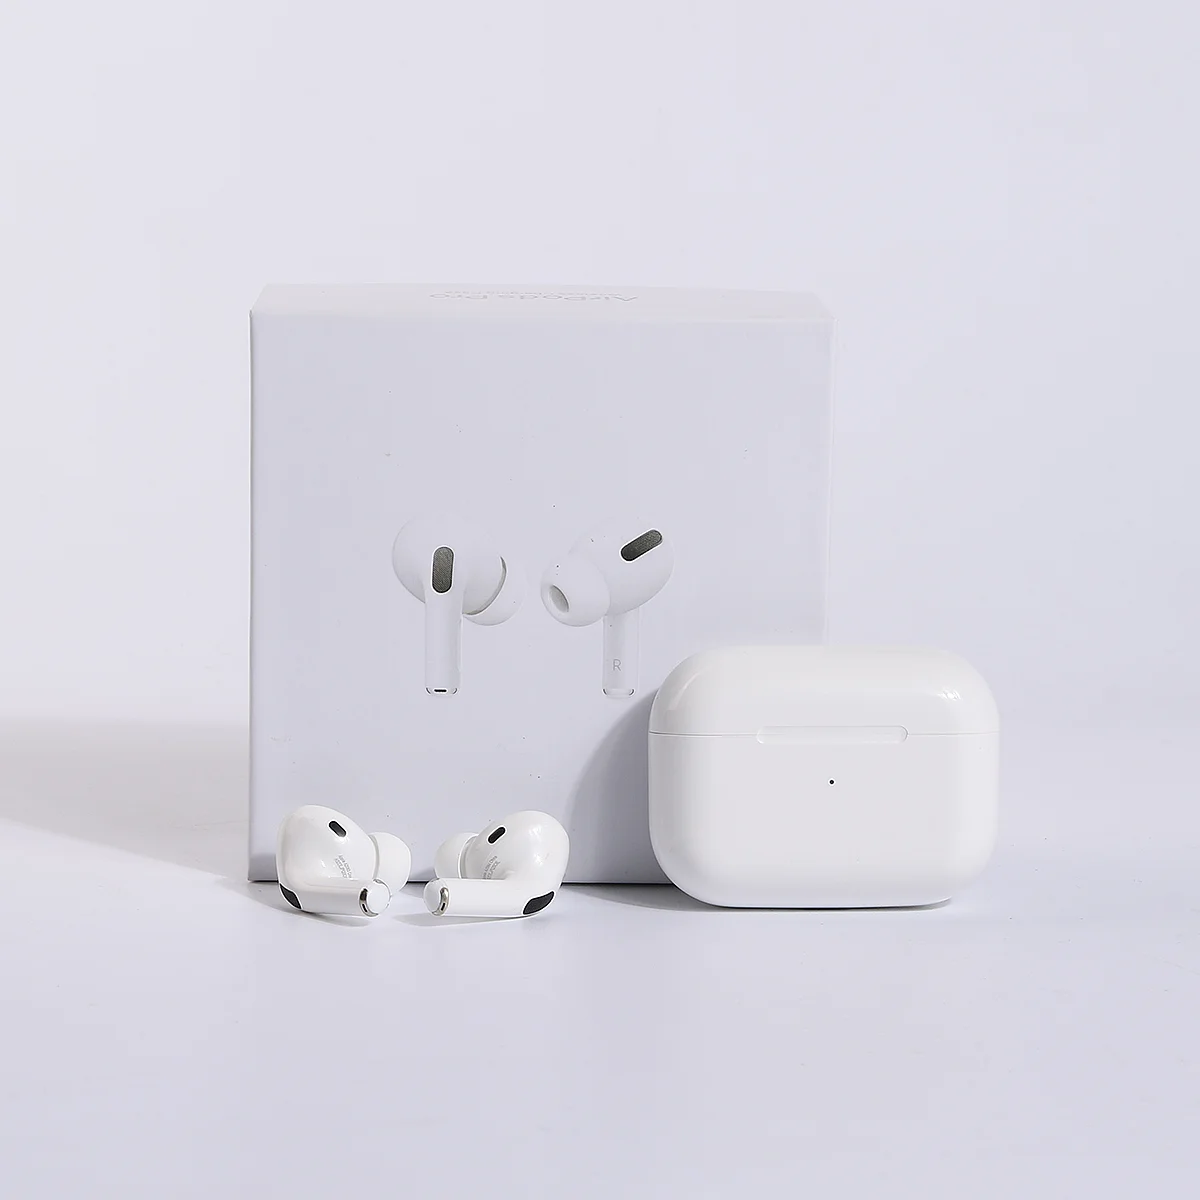 

Factory Quality With Appled Logo Box Noise Cancel 1:1 Airpodding Pro Gen 2 Air 3 2 Pods Wireless Earphone Appled Airpodding Pro